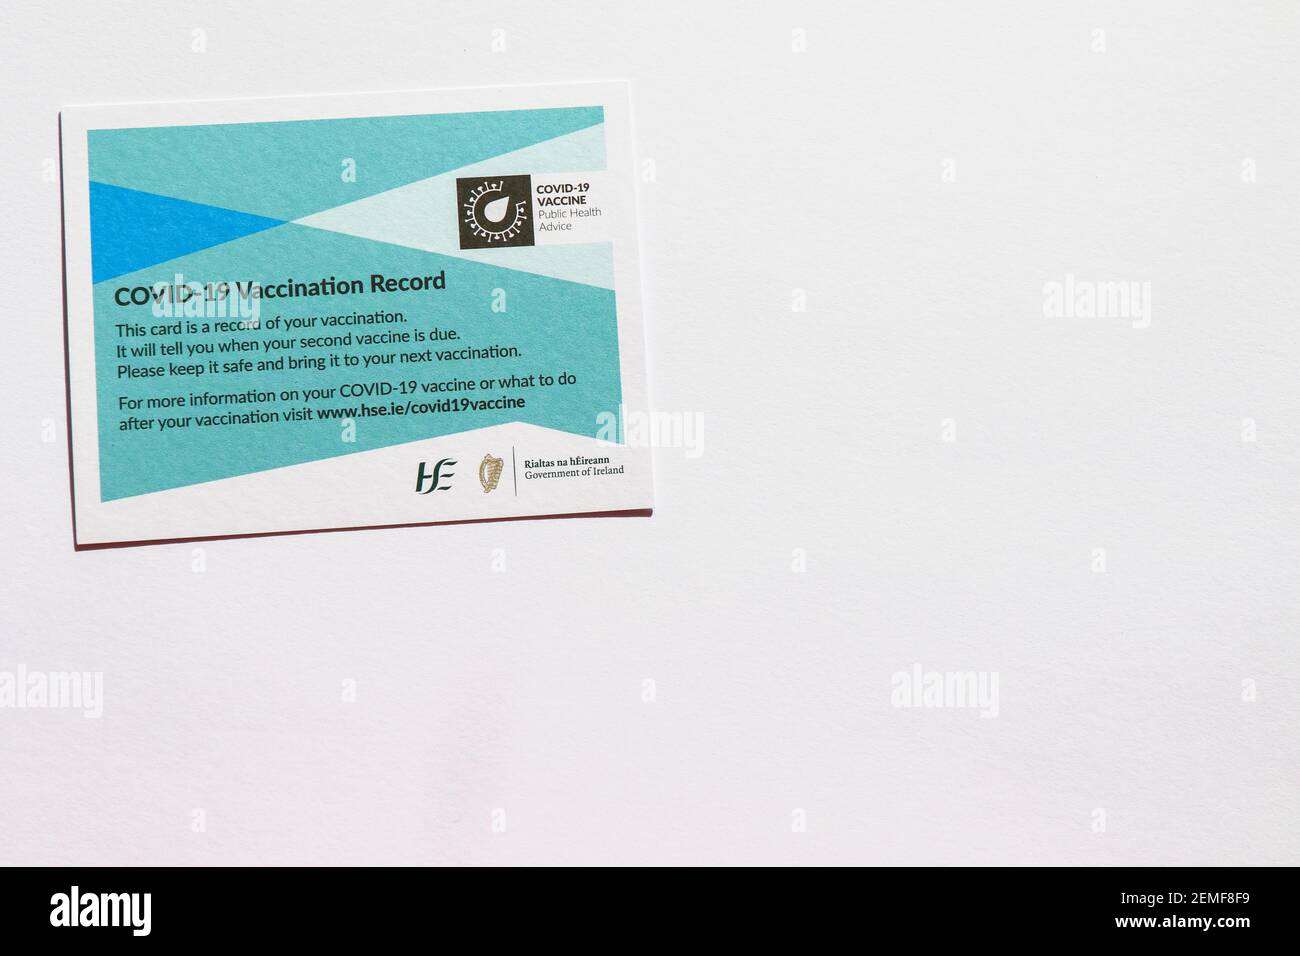 irish covid 19 vaccination record card used to log details of vaccine vaccinations given issued by government of ireland health service executive 2EMF8F9